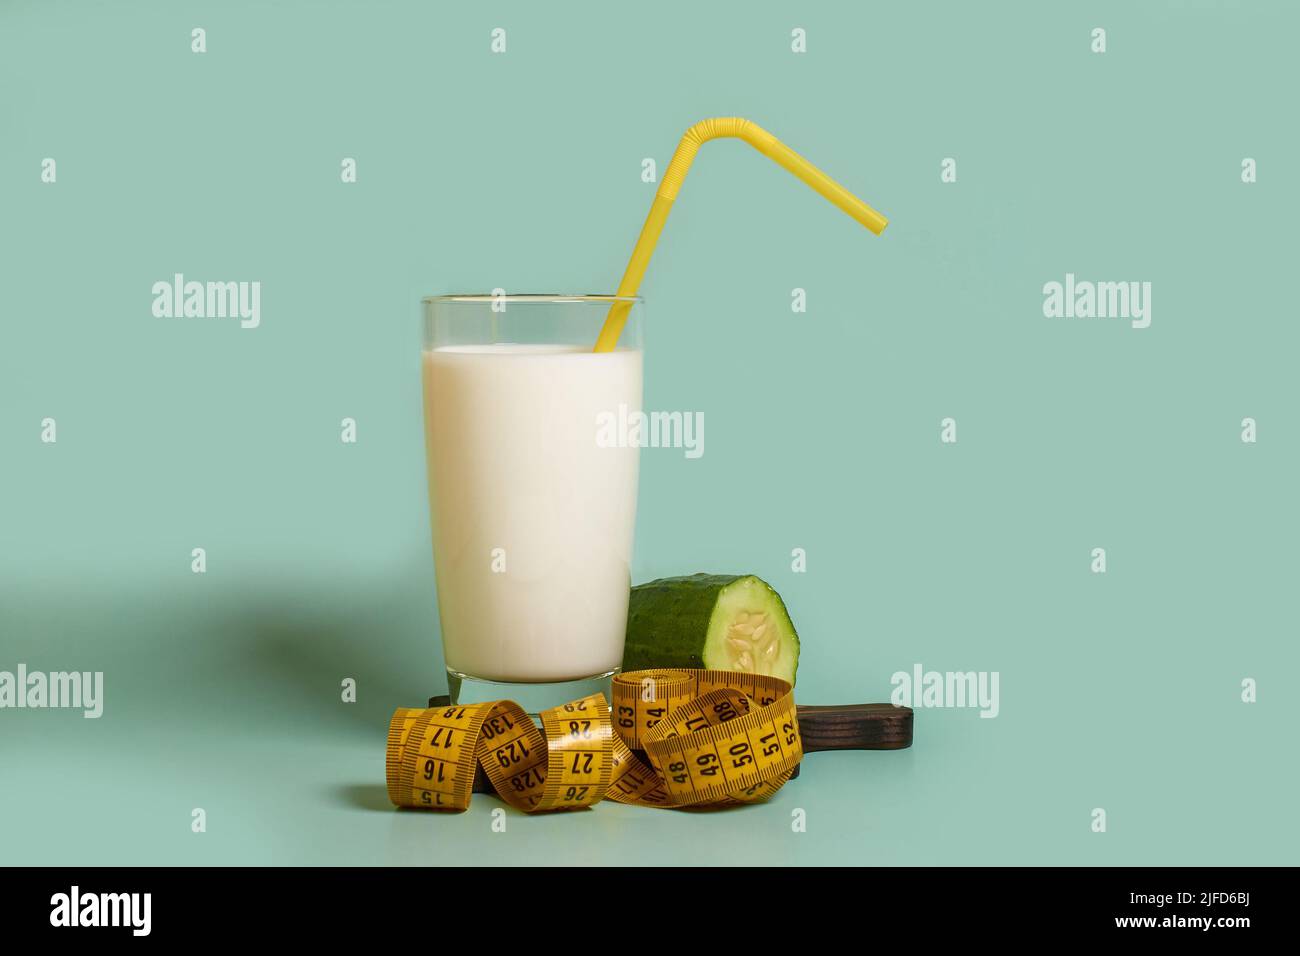 A glass of milk with a plastic tube, a cucumber and a tailor's meter  Stock Photo